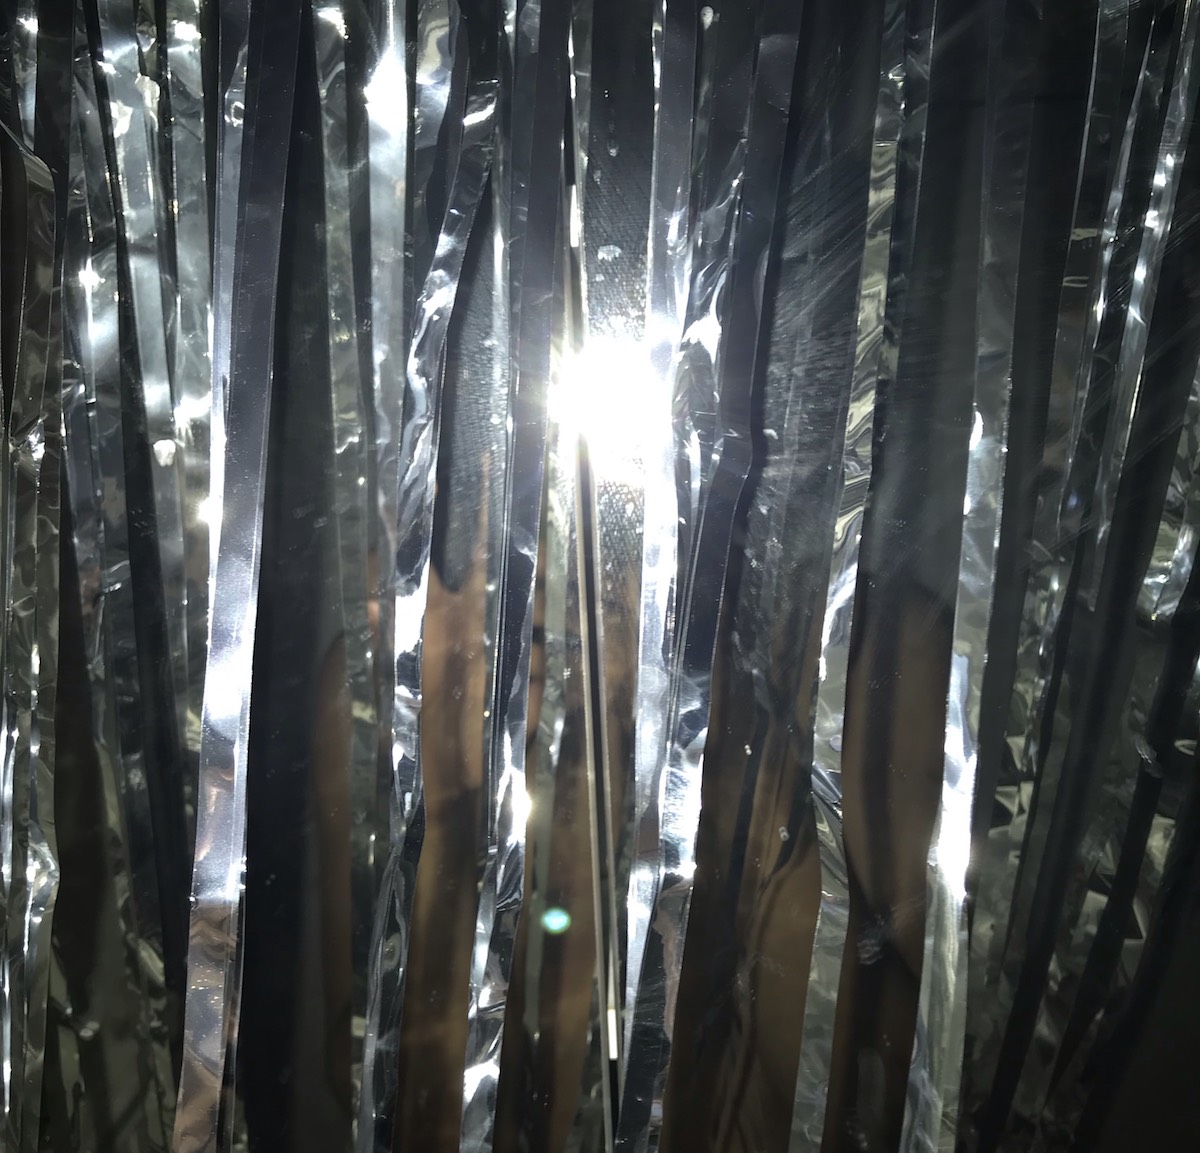 A bright flash on top of mylar ribbons.